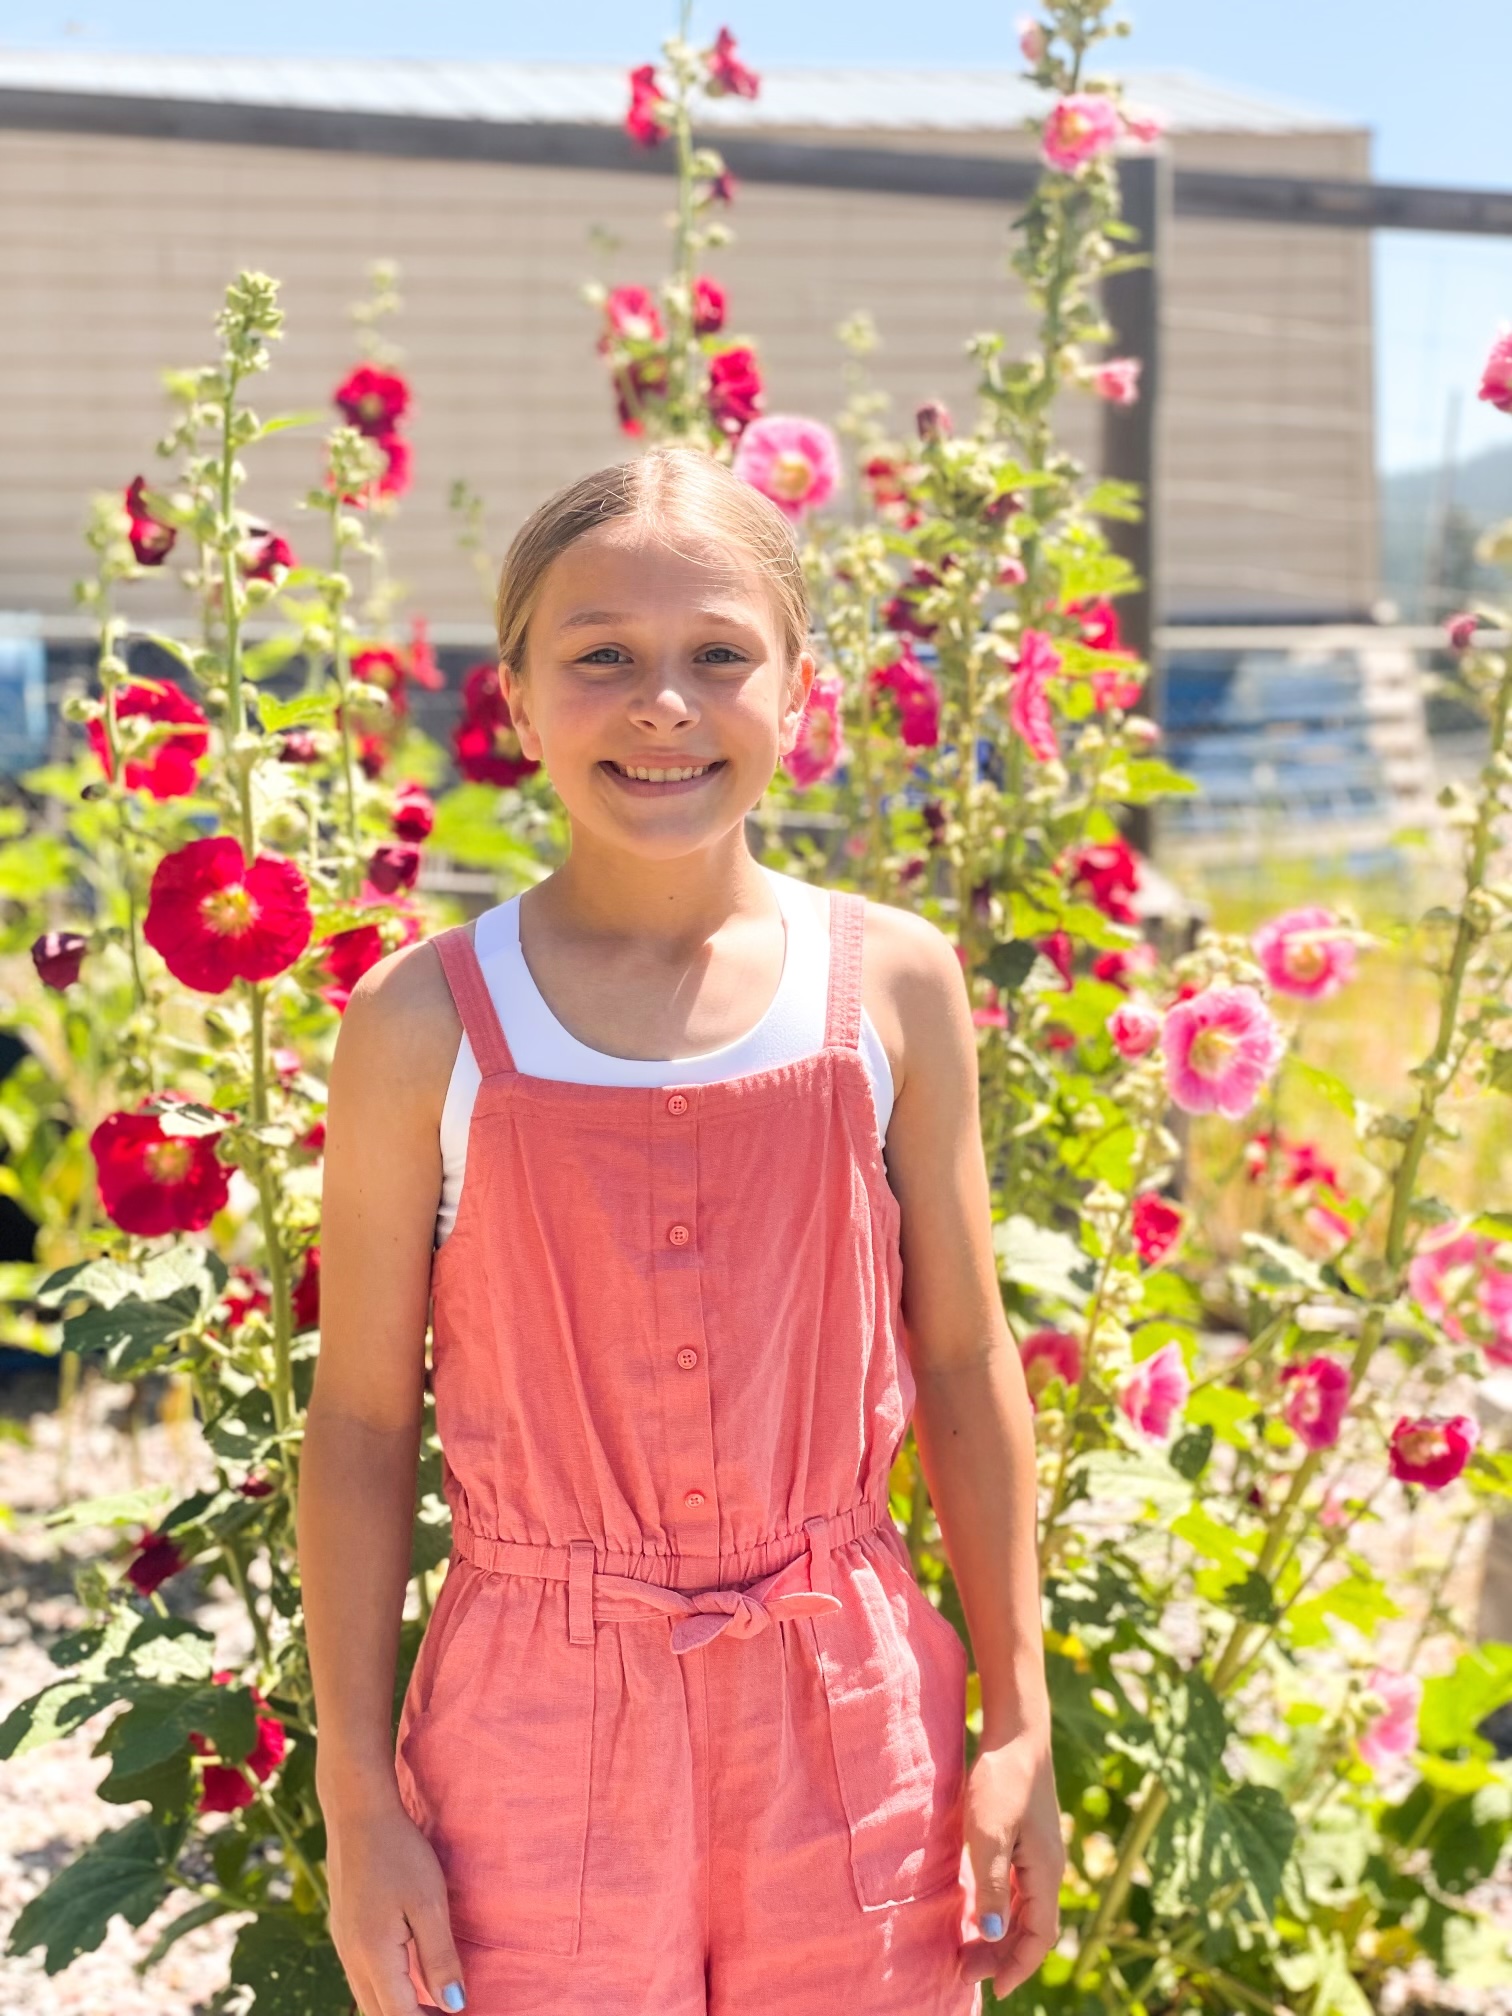 Student standing in front of Hollyhock plants